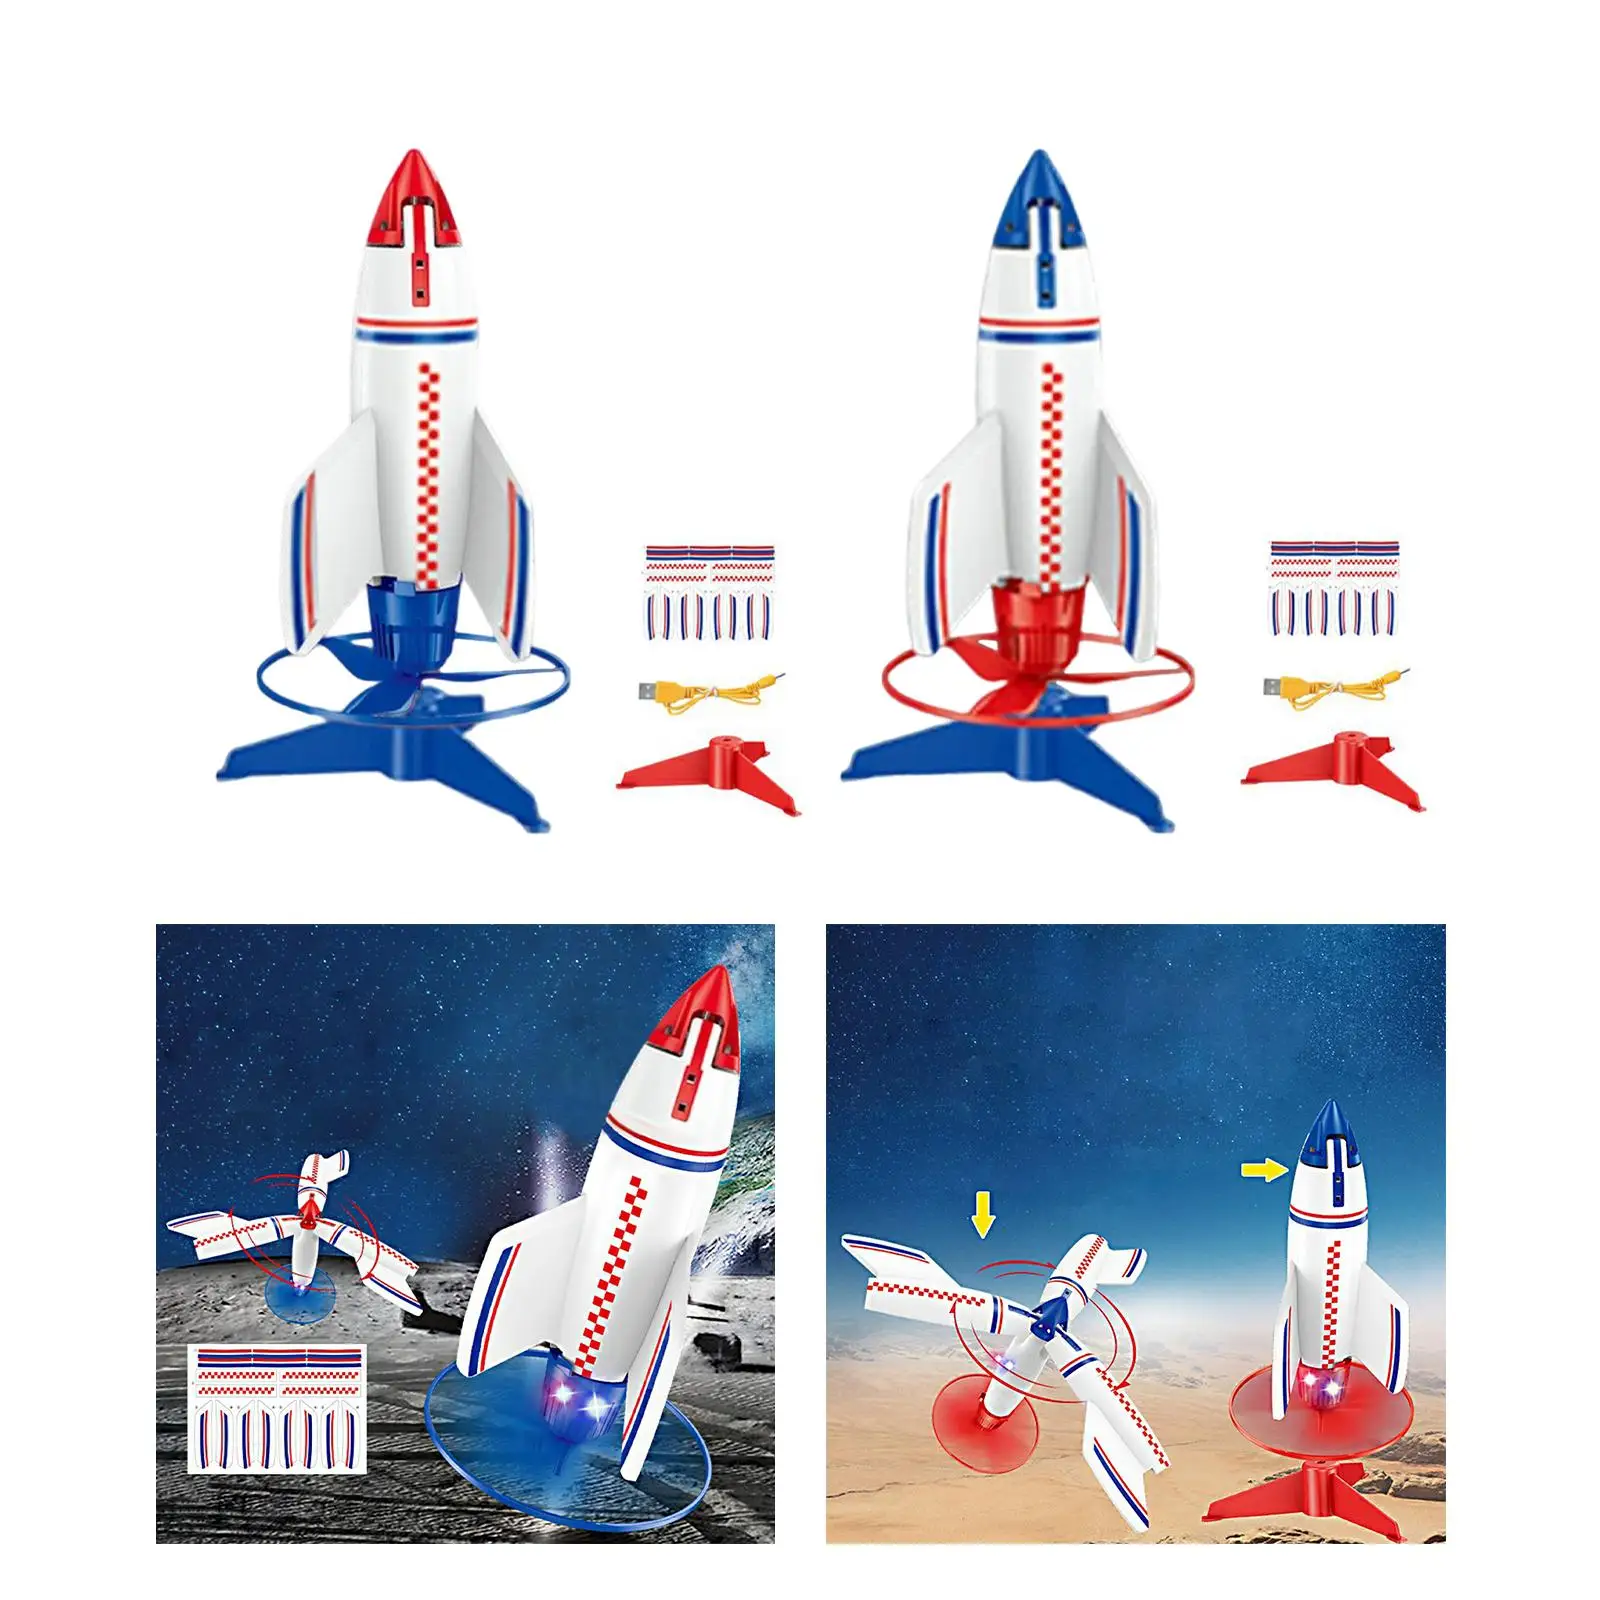 Rocket Launcher for Kids Self Launching Rocket Toys for Boys and Girls